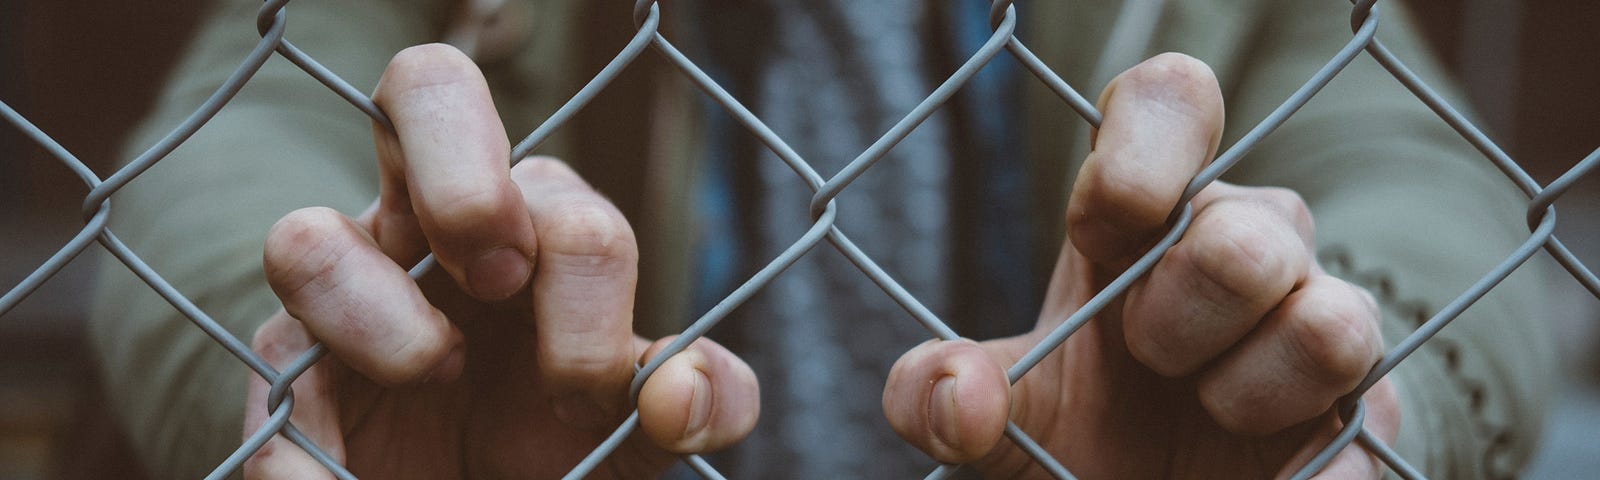 Close-up of a man’s hands grabbing a wire fence.